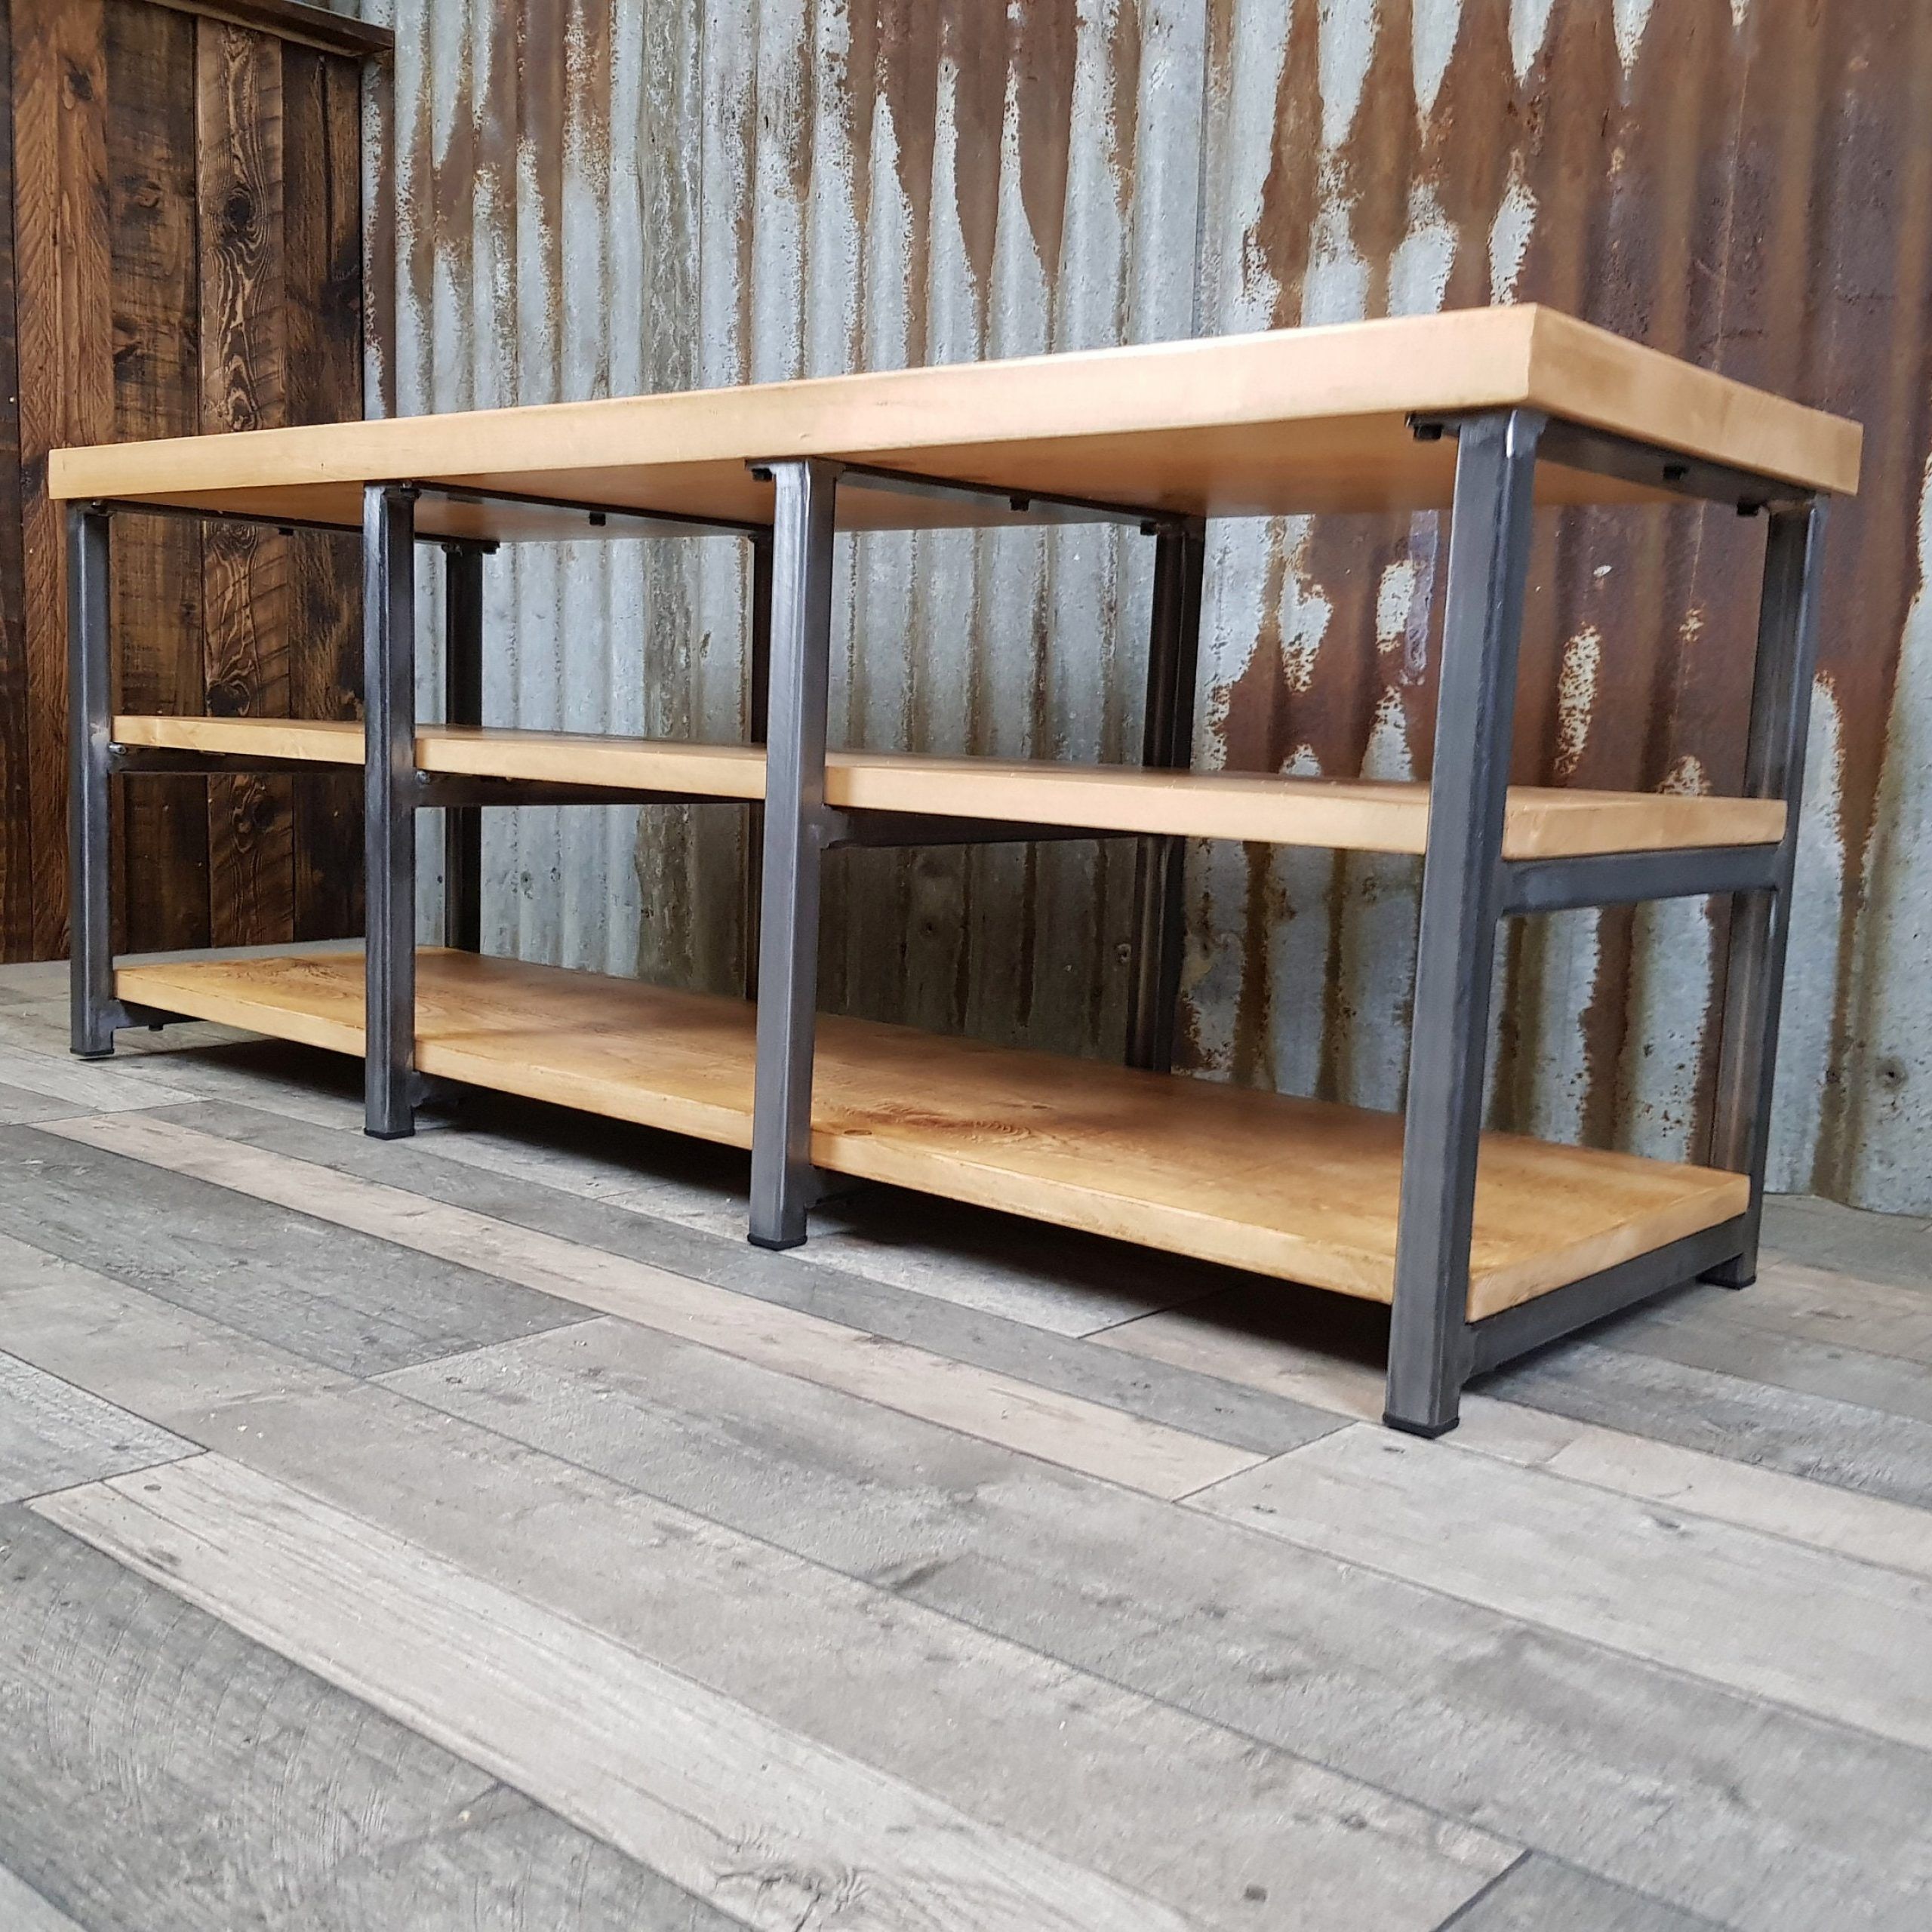 Industrial Inspired Tv Bench, Rustic Tv Bench, Bespoke For Tv Bench Unit (View 15 of 15)